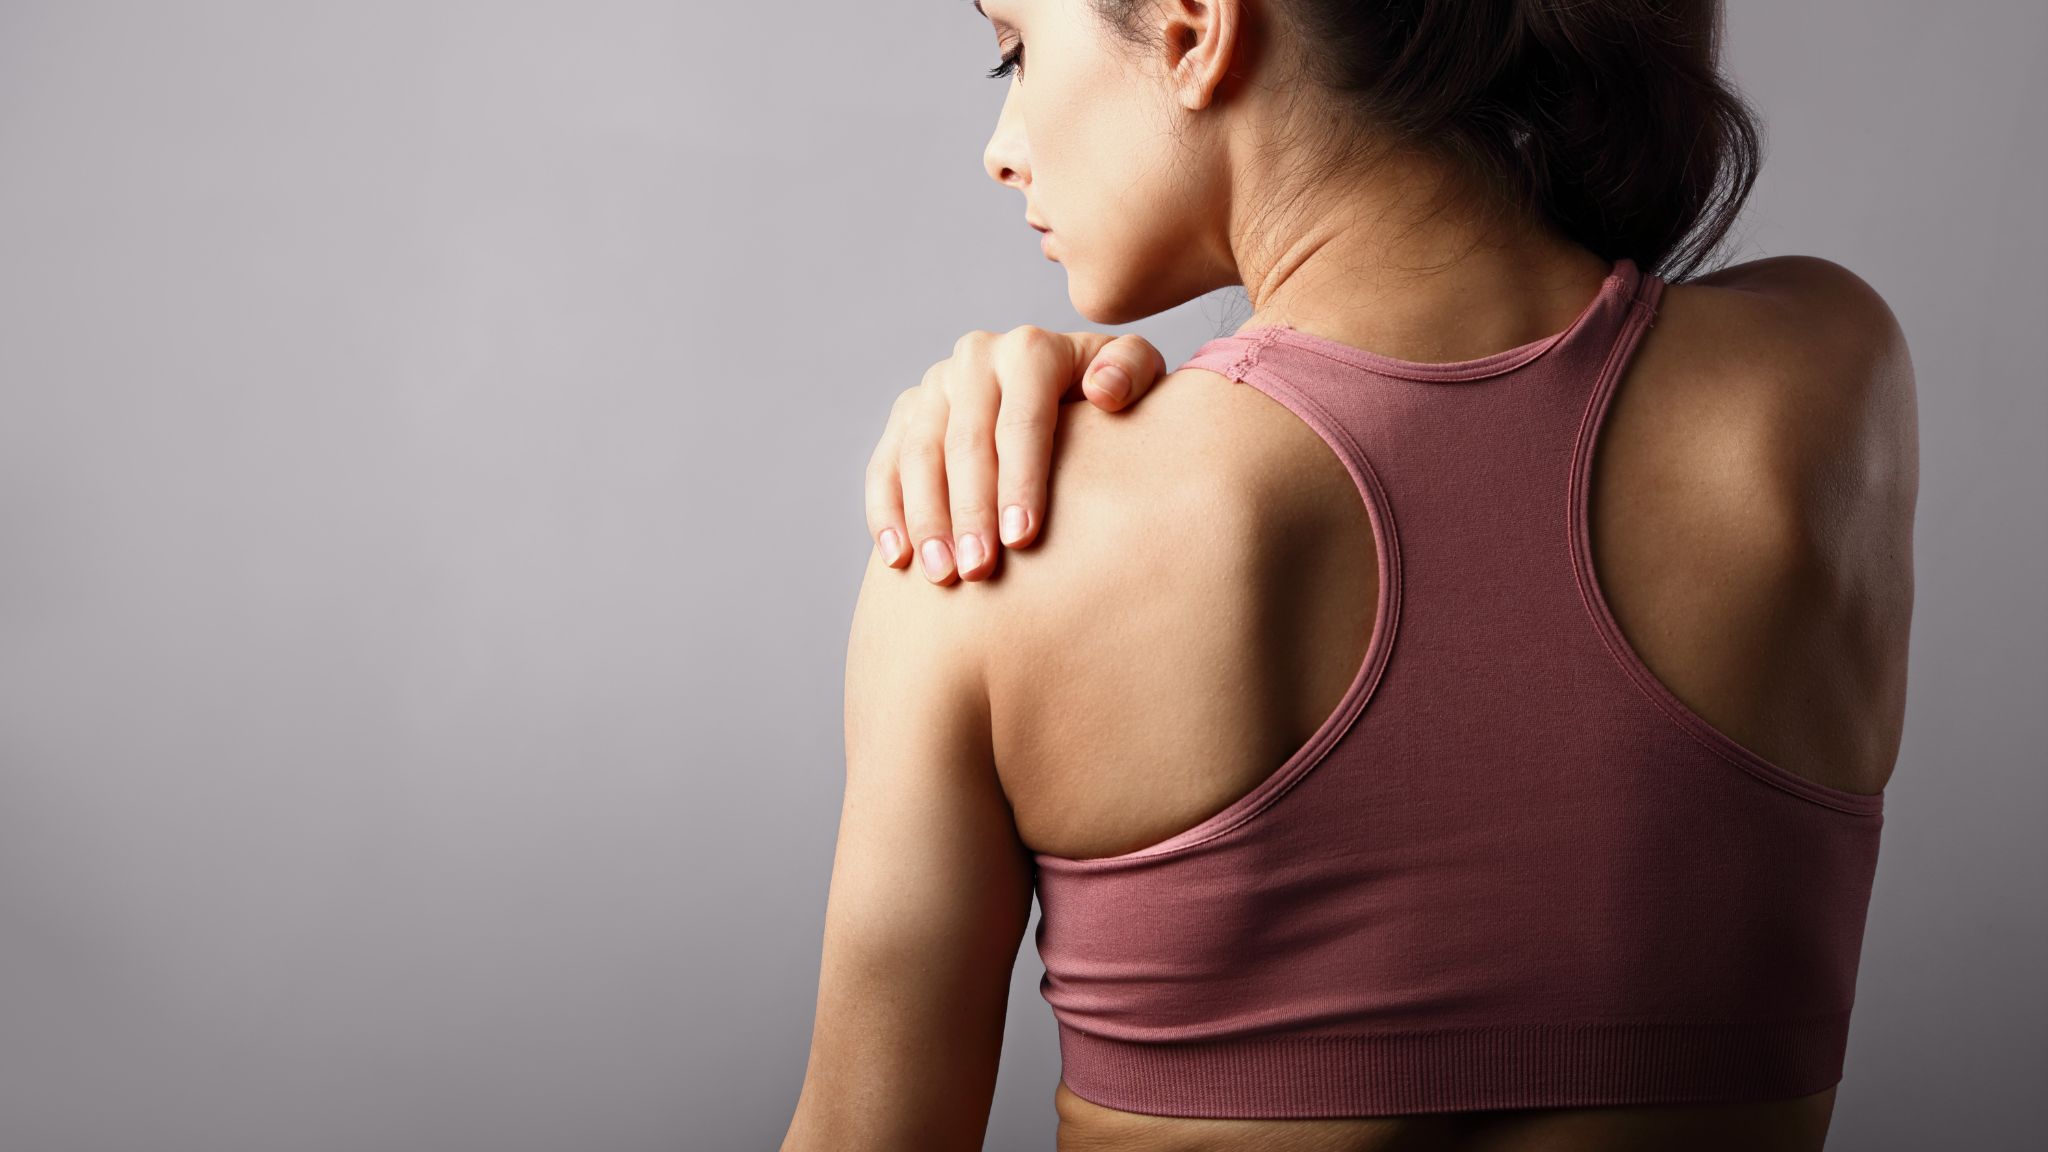 5 Shoulder Exercises to Help with Shoulder Pain